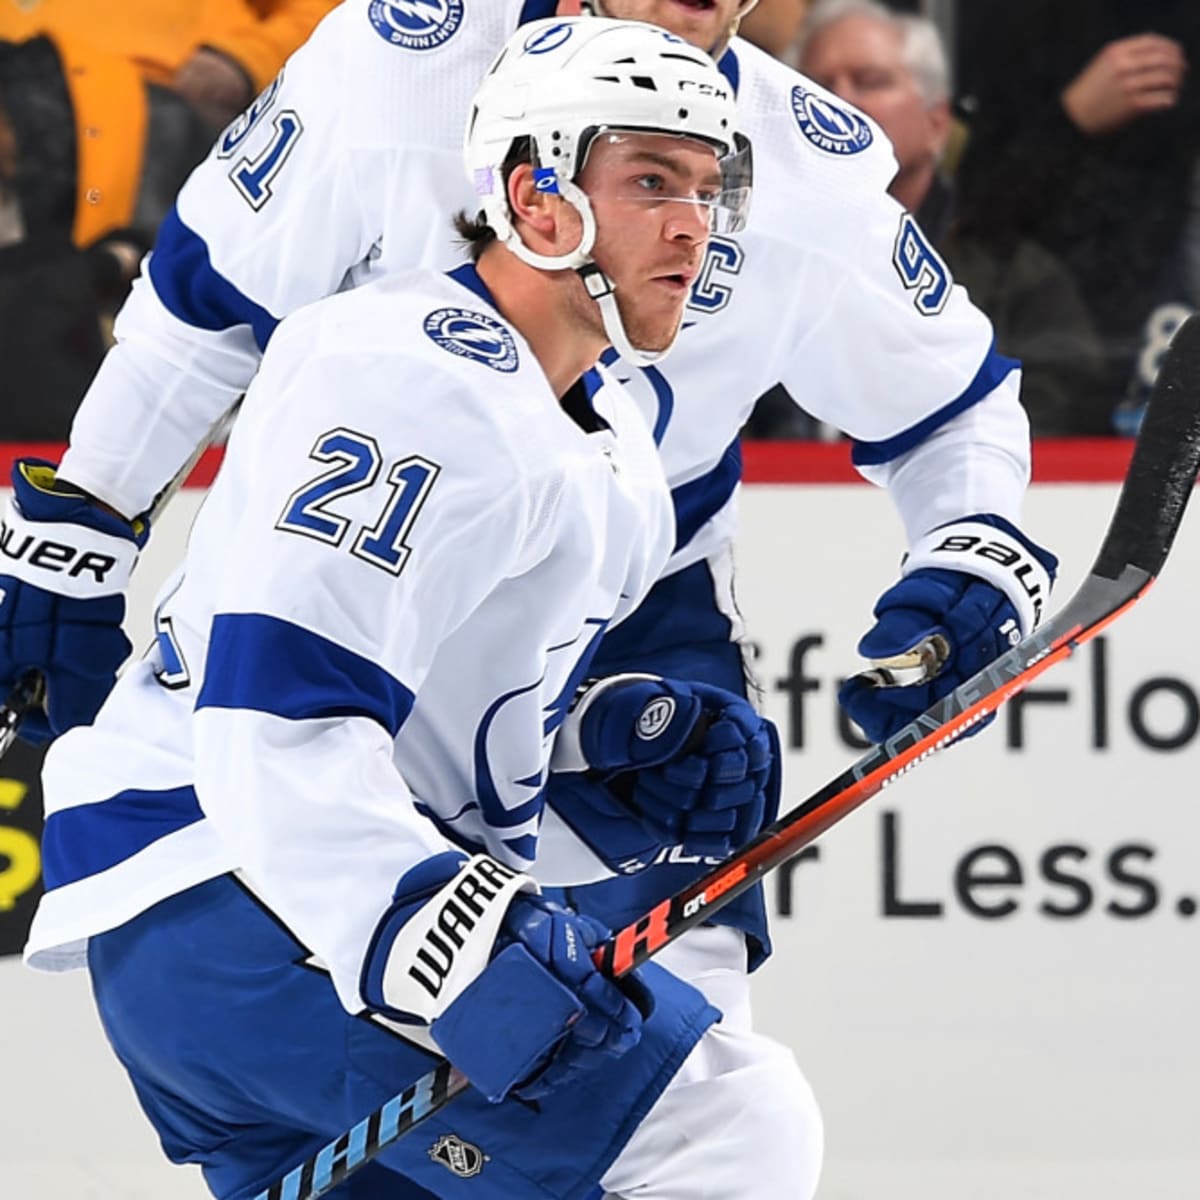 Lightning's Point out indefinitely with upper-body injury